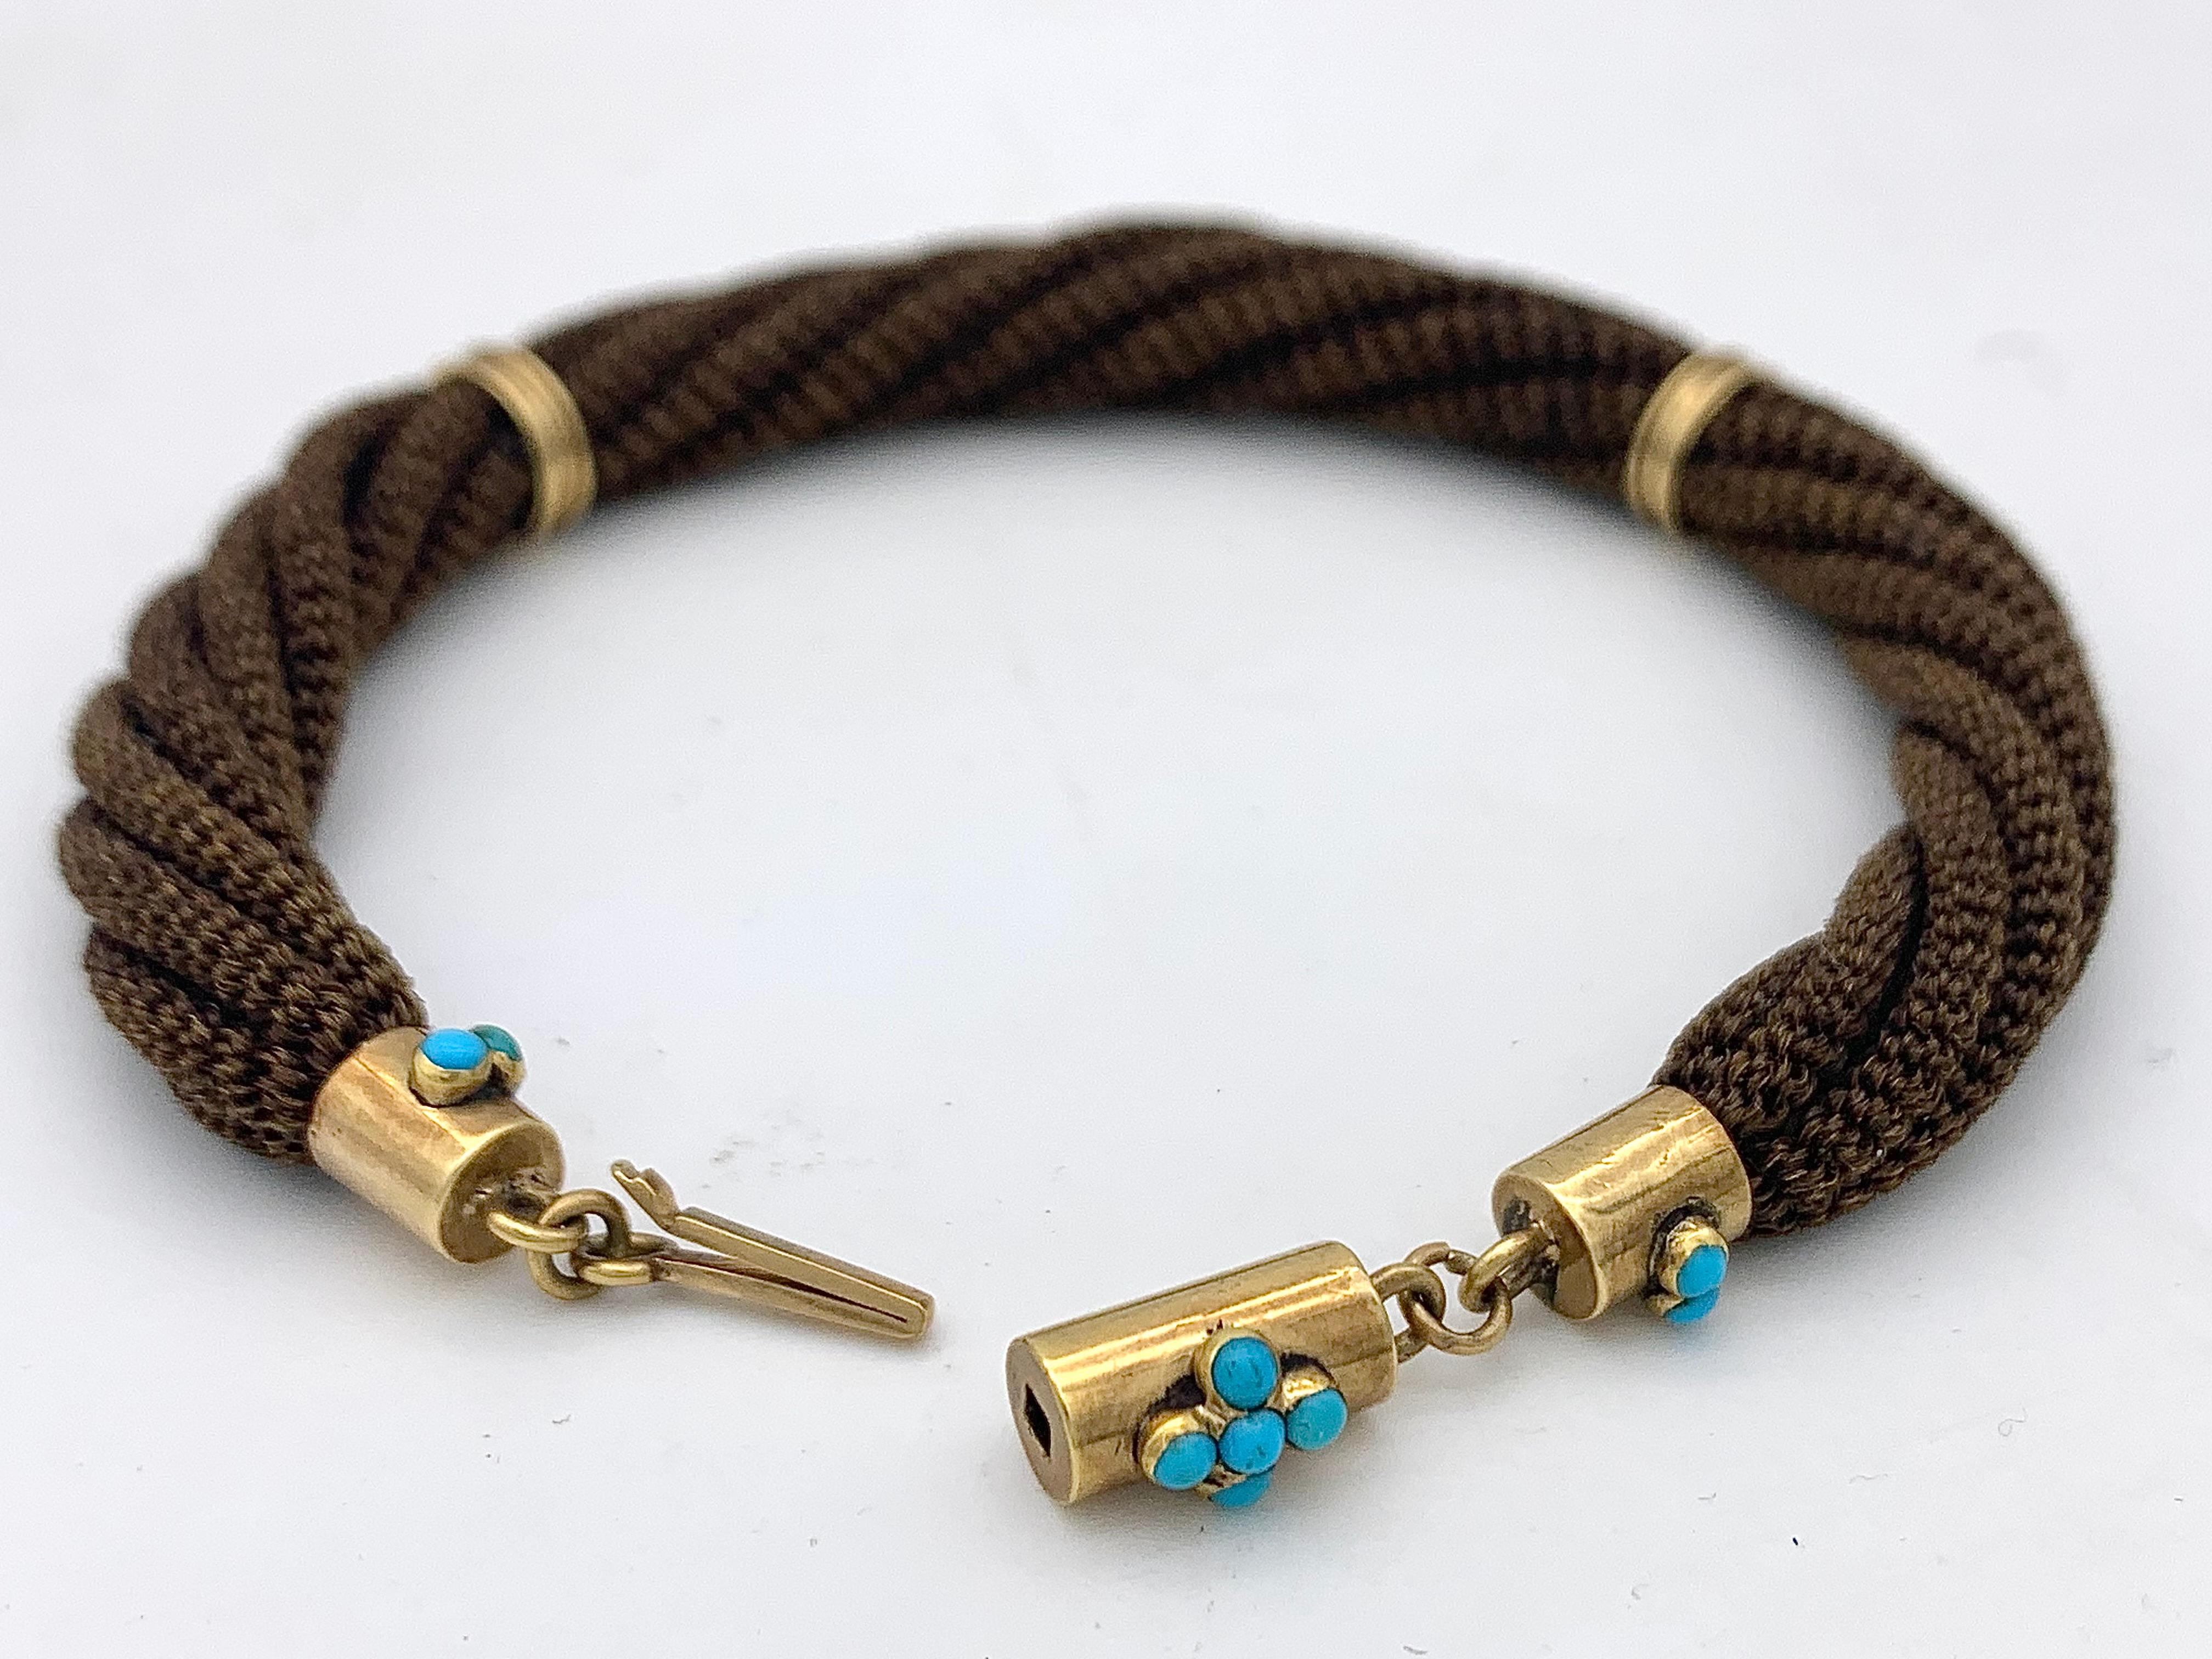 This handcrafted bracelet was intended as a sentimental token of friendship. The perfectly woven brown hair bracelet is made up out of six individually woven thin ropes. The bracelet has a wonderful elasticity. The clasp is made out of 14 karat